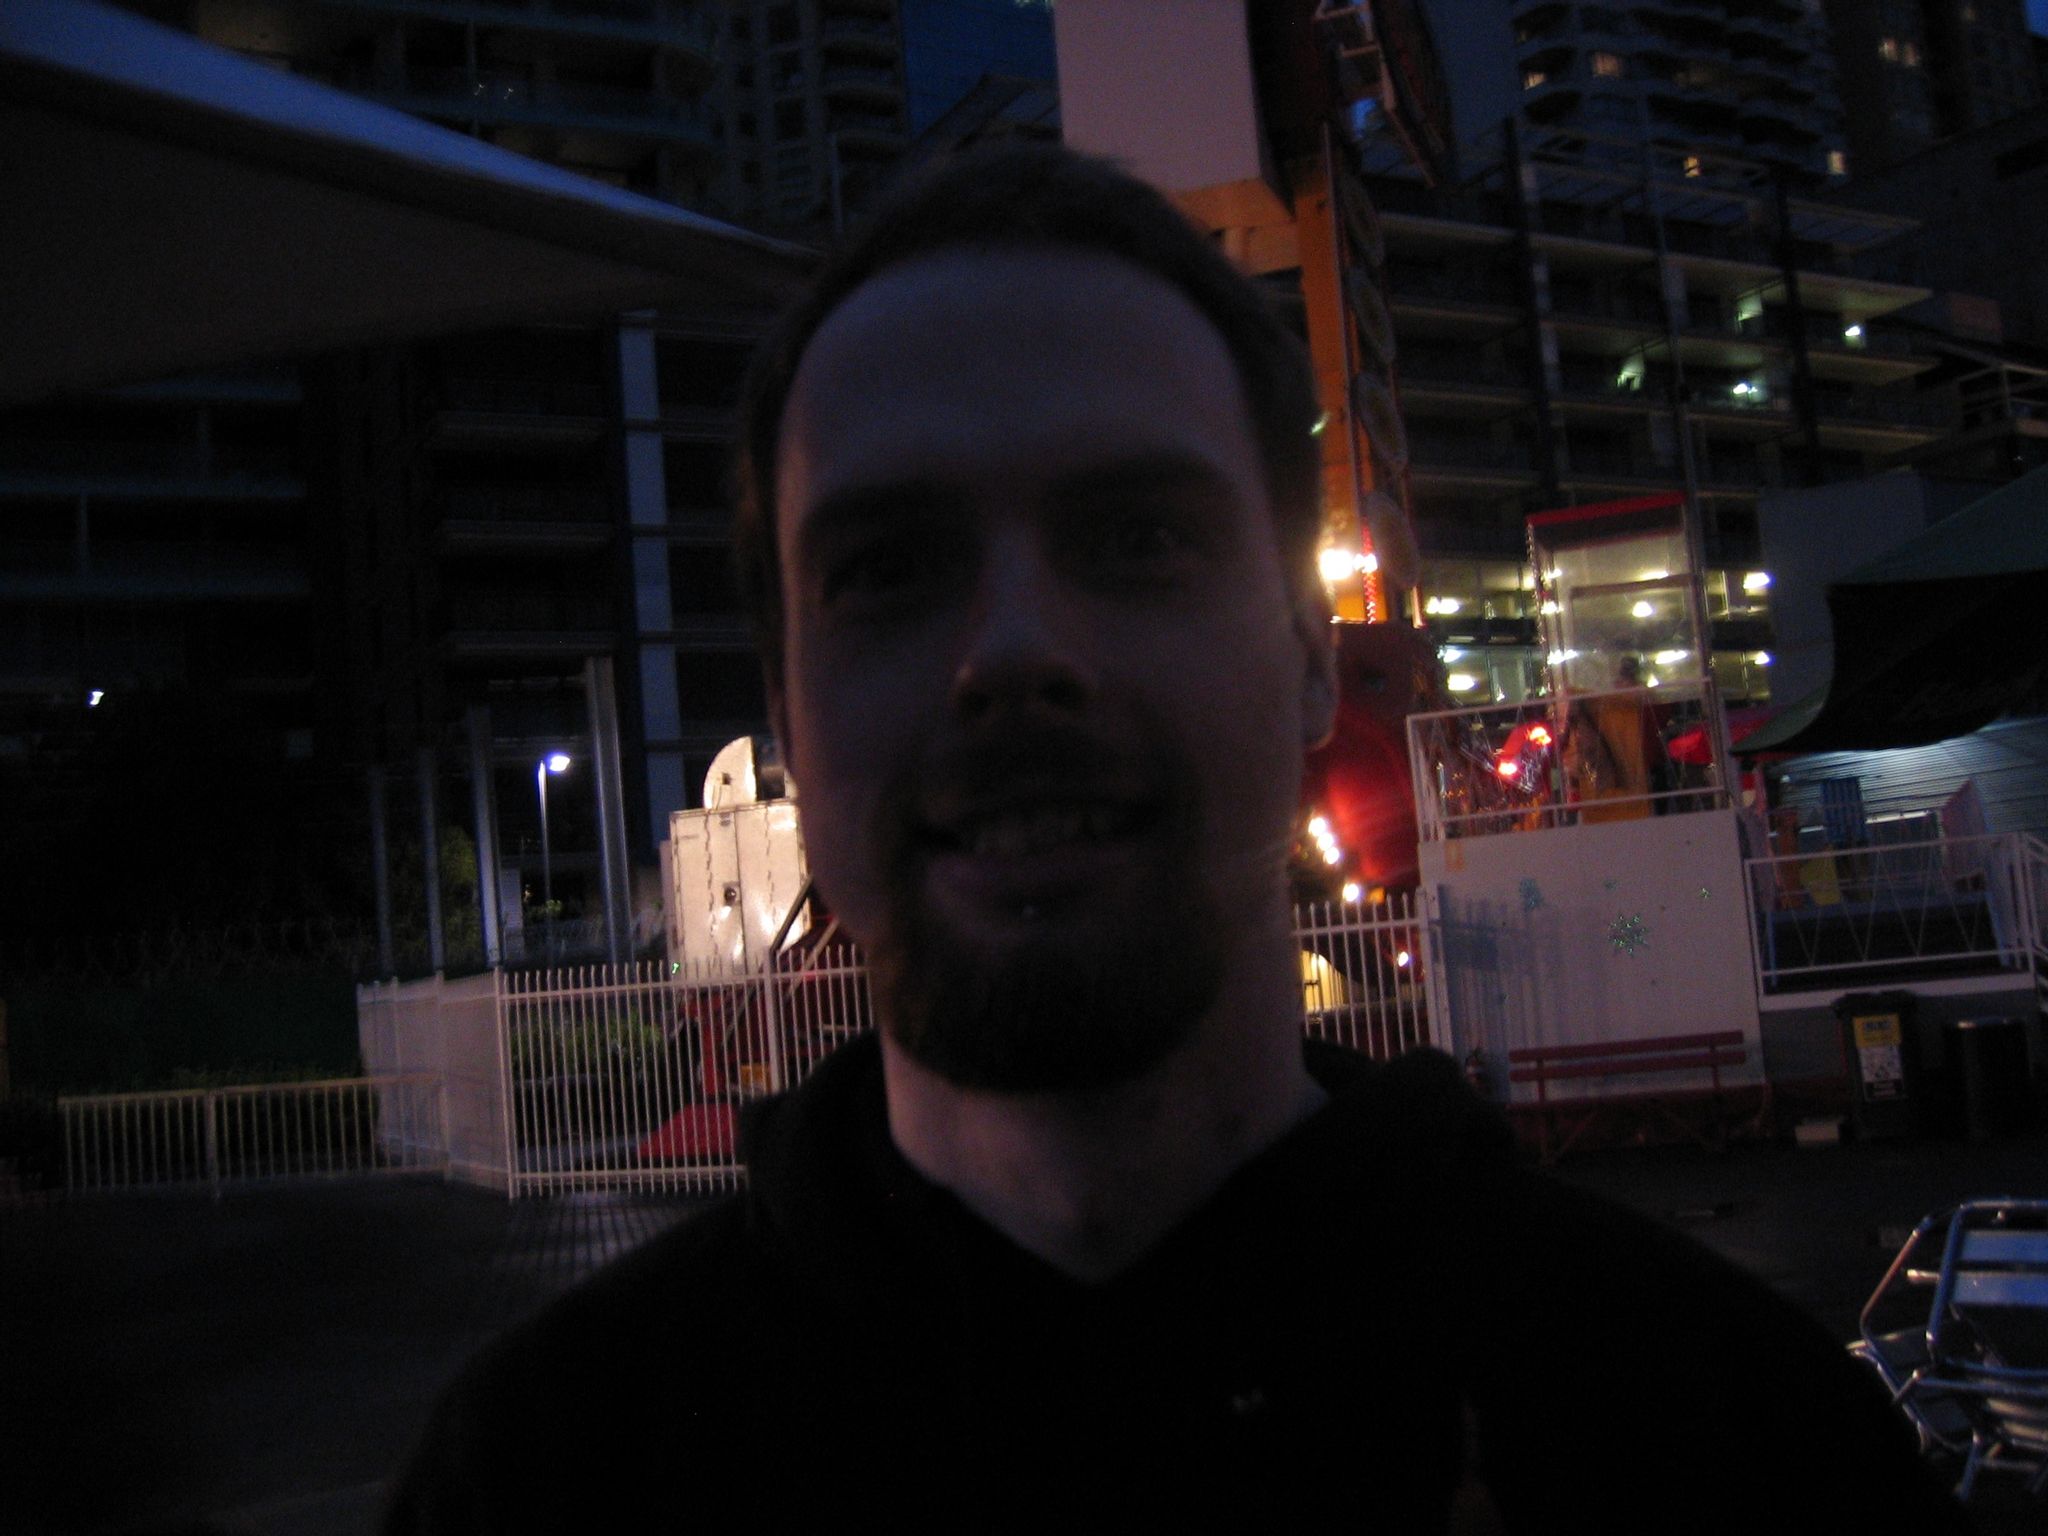 A VERY dimly-lit photo of me, a white man with short brown hair and a goatee.